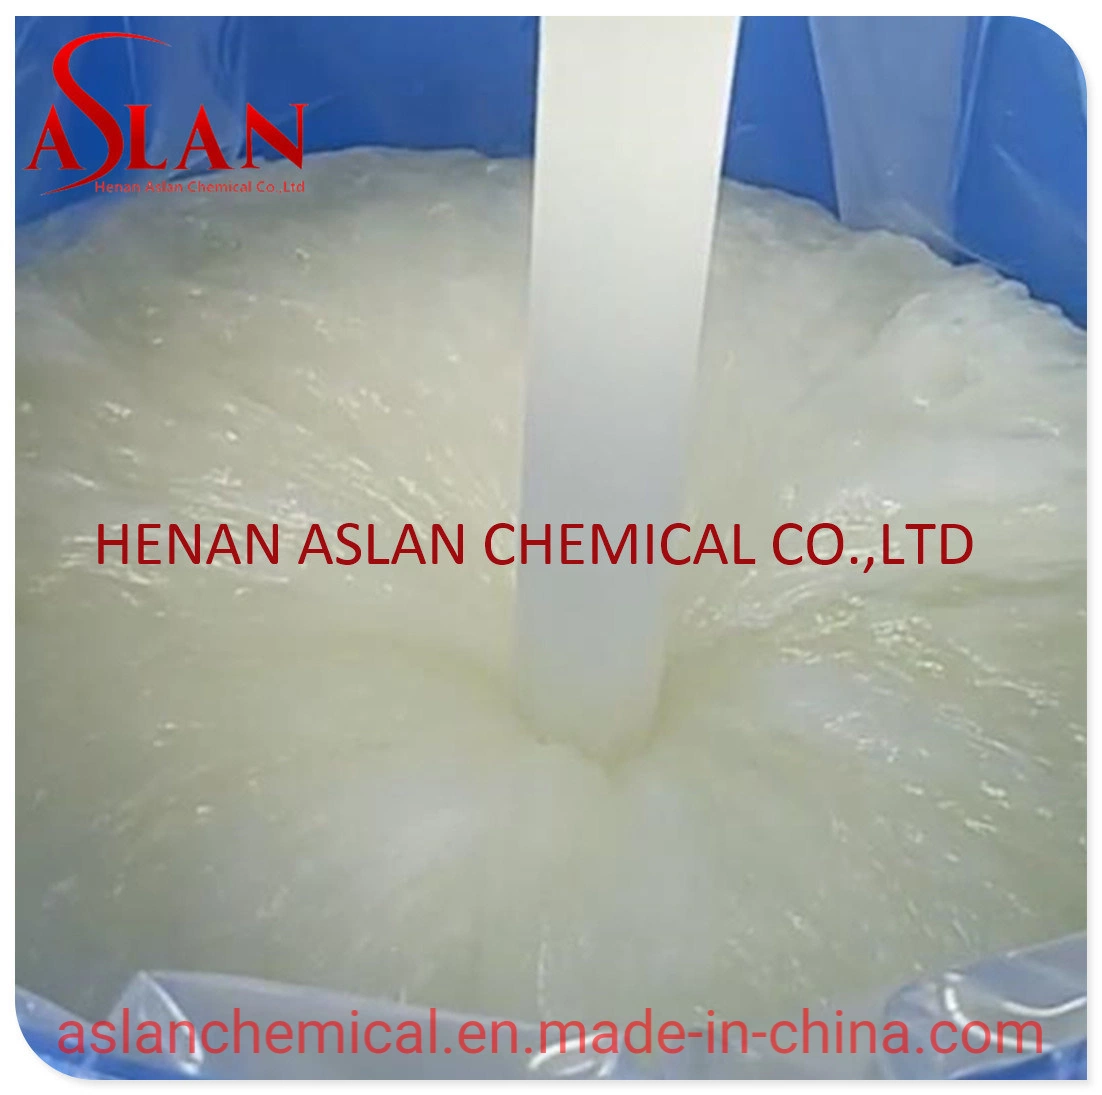 CAS 68891-38-3//Sodium Laureth Sulfate//2eo SLES Chemical for Personal Care Products (detergent/shampoo/cosmetics) CAS 9004-82-4